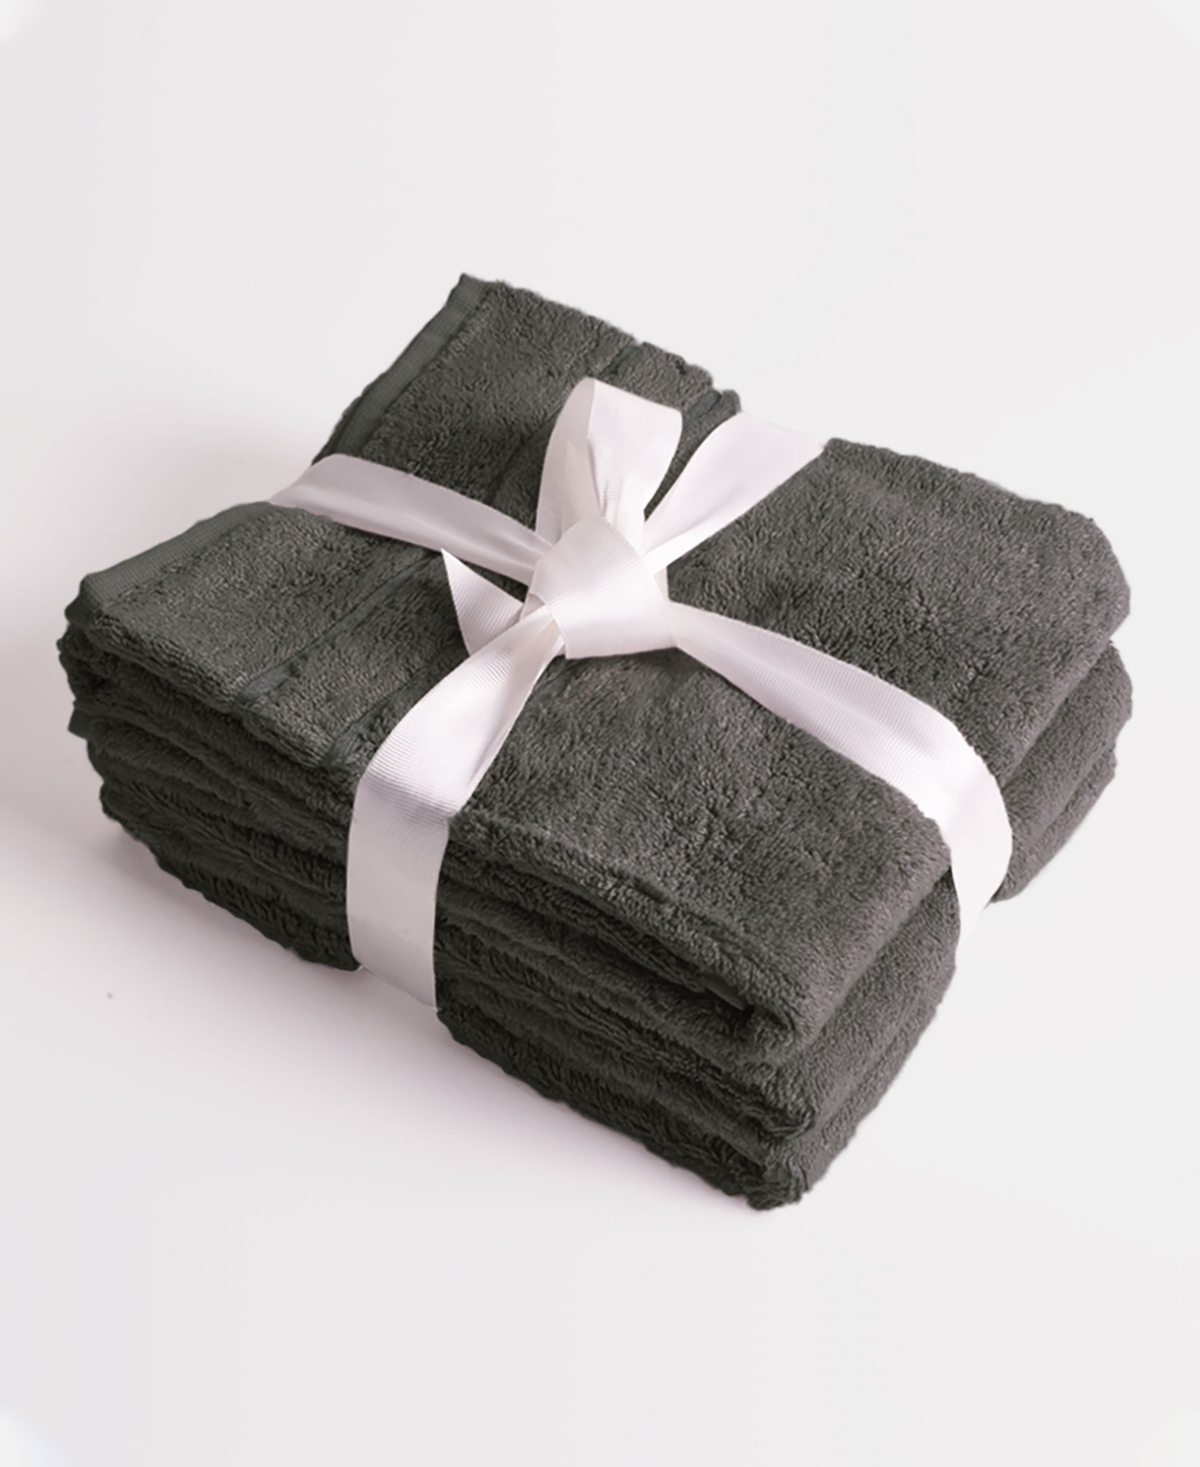 Cariloha 3-piece 13" X 13" Viscose Washcloth Set In Charcoal